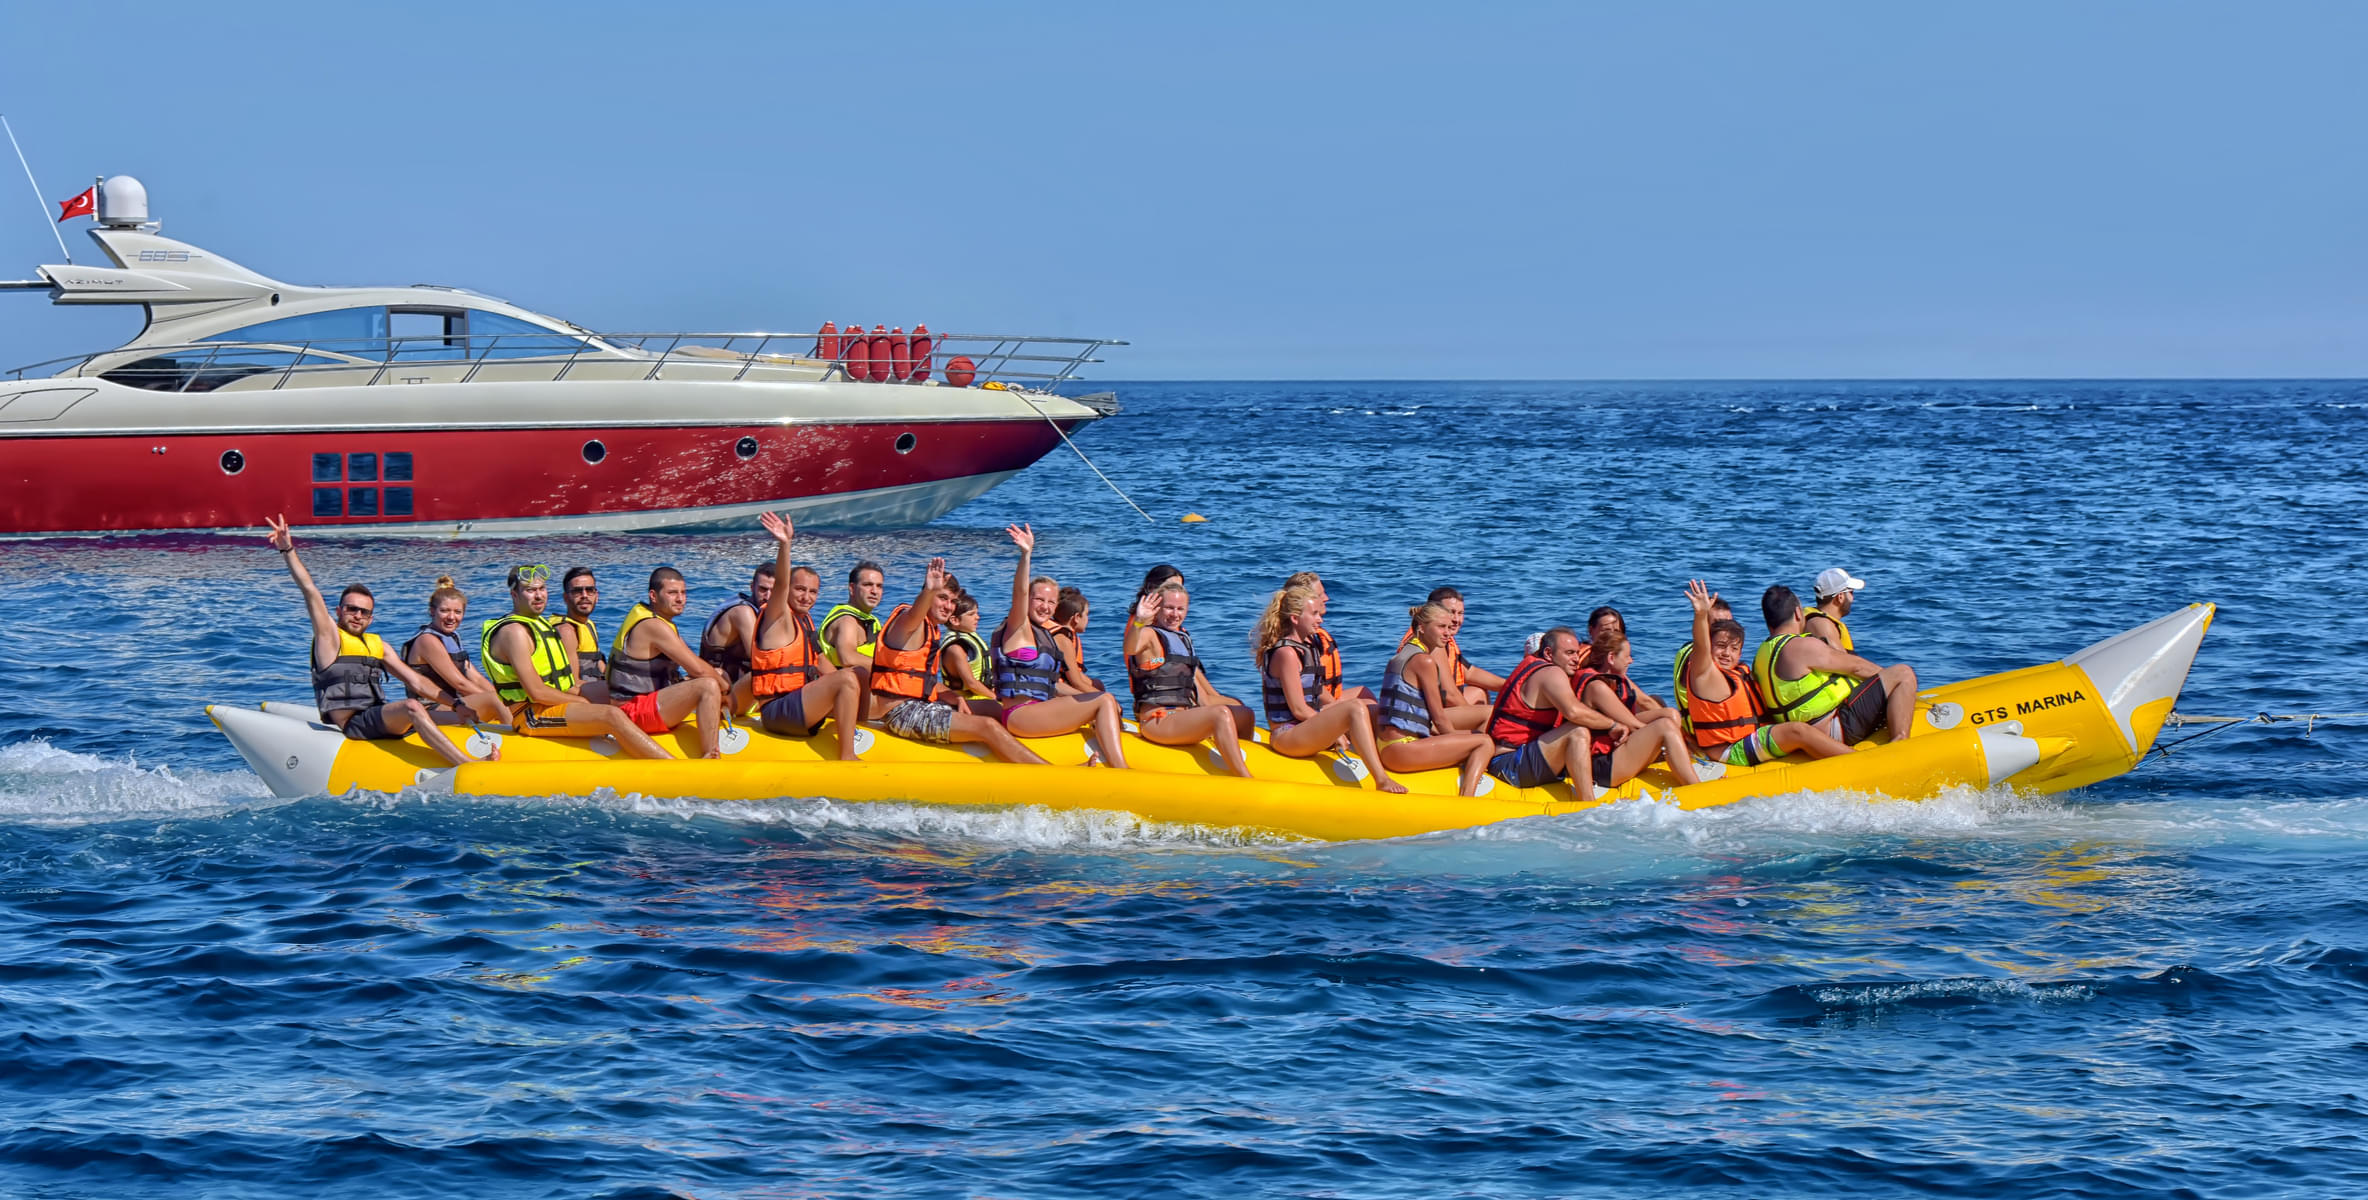 Go for a fun and thrilling banana boat ride with life jackets on